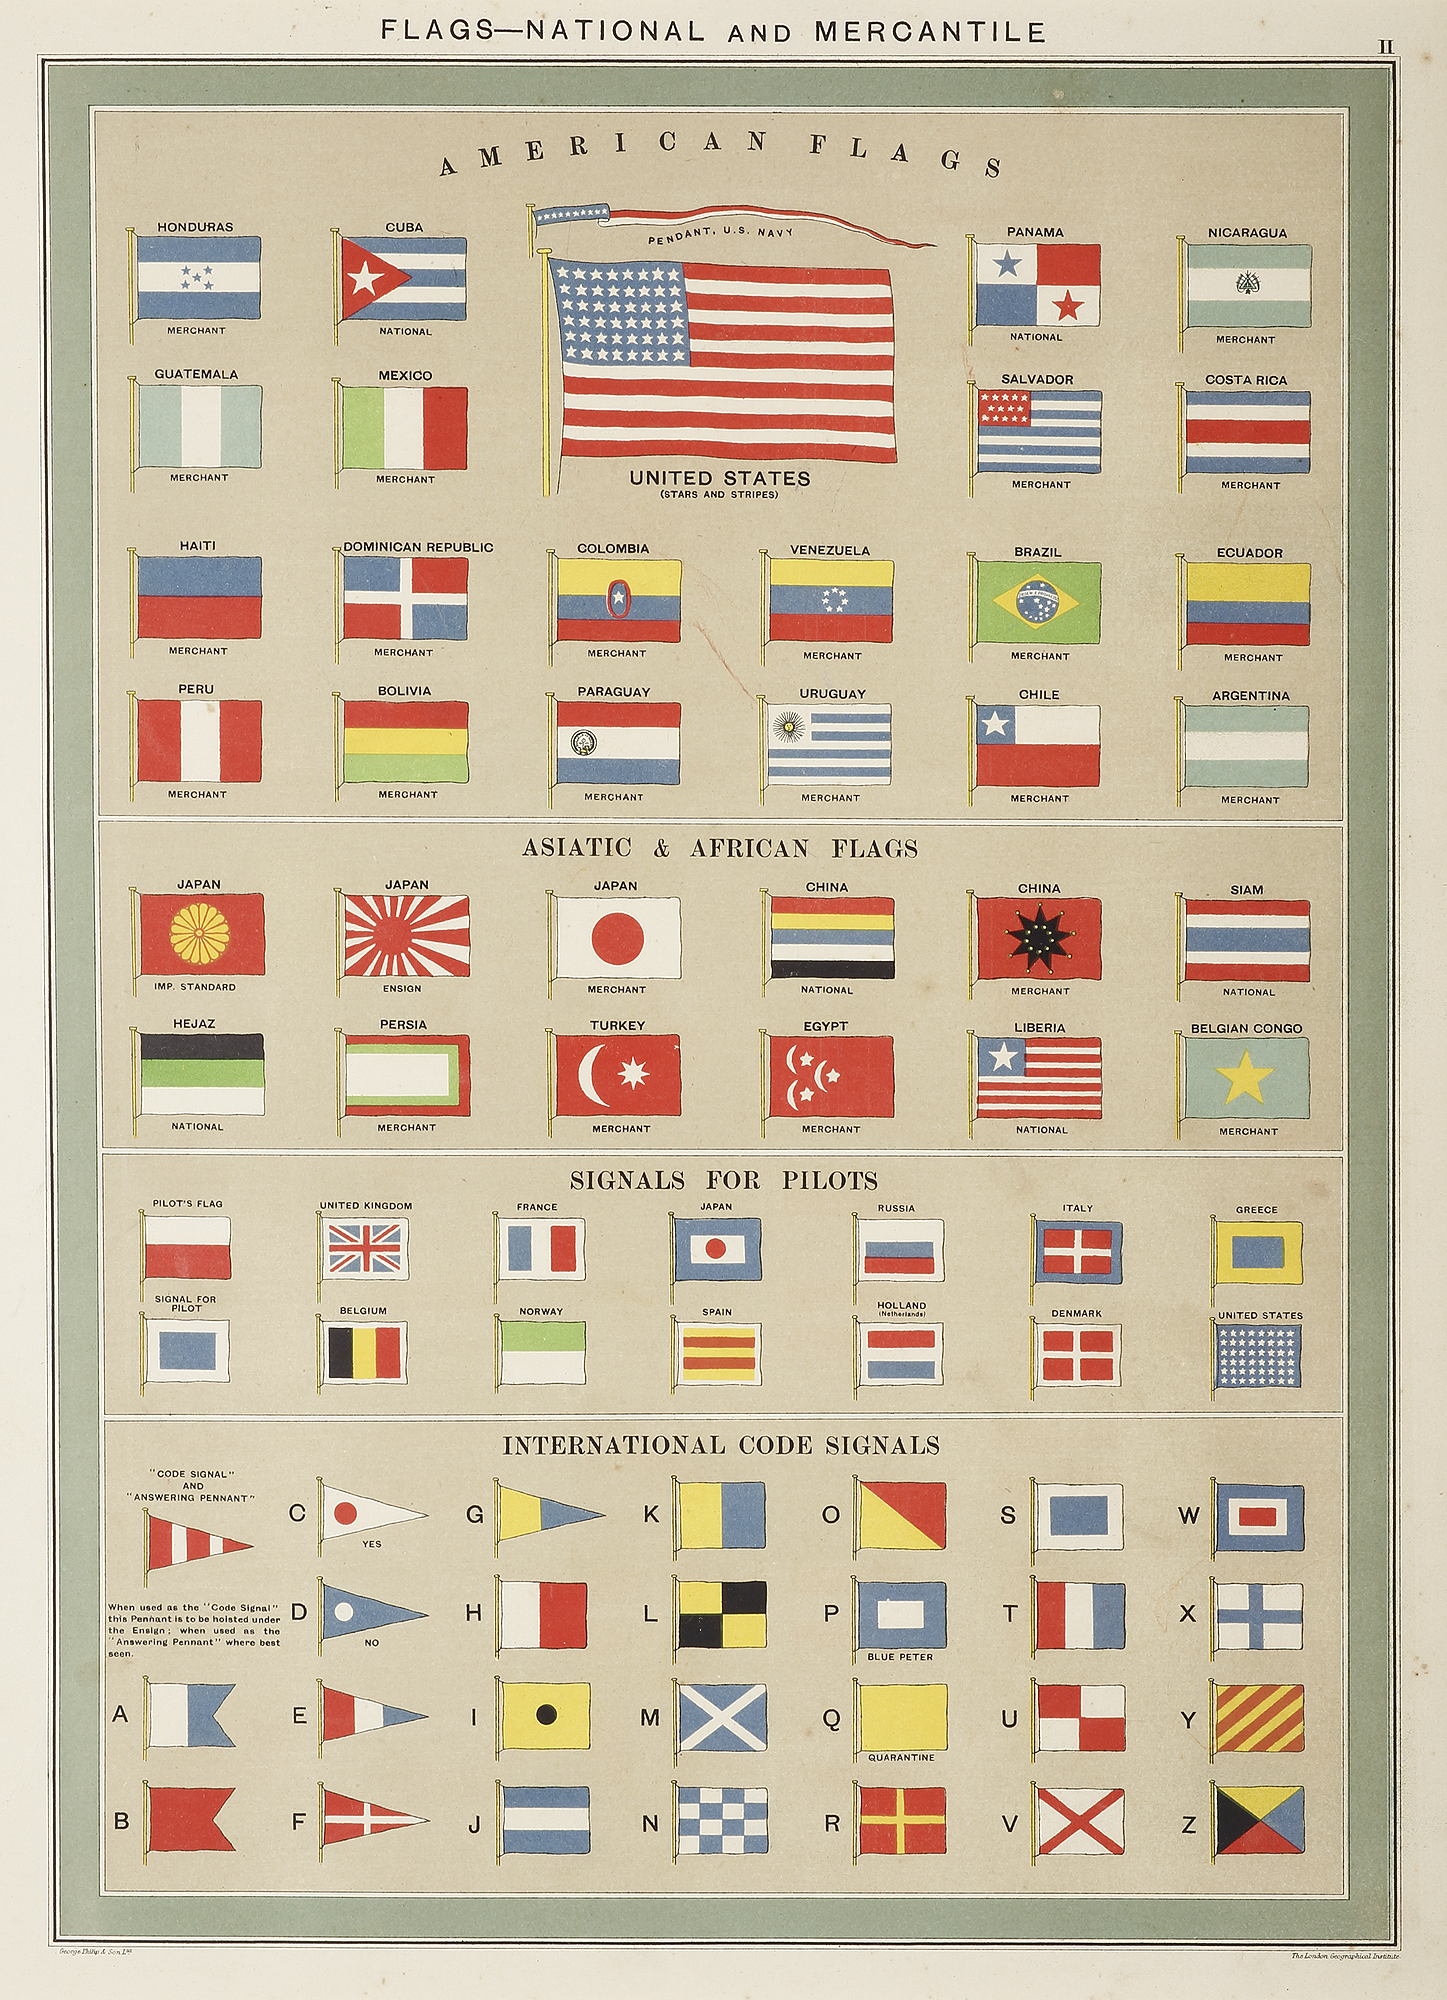 Flags-National and Mercantile - Antique Print from 1920